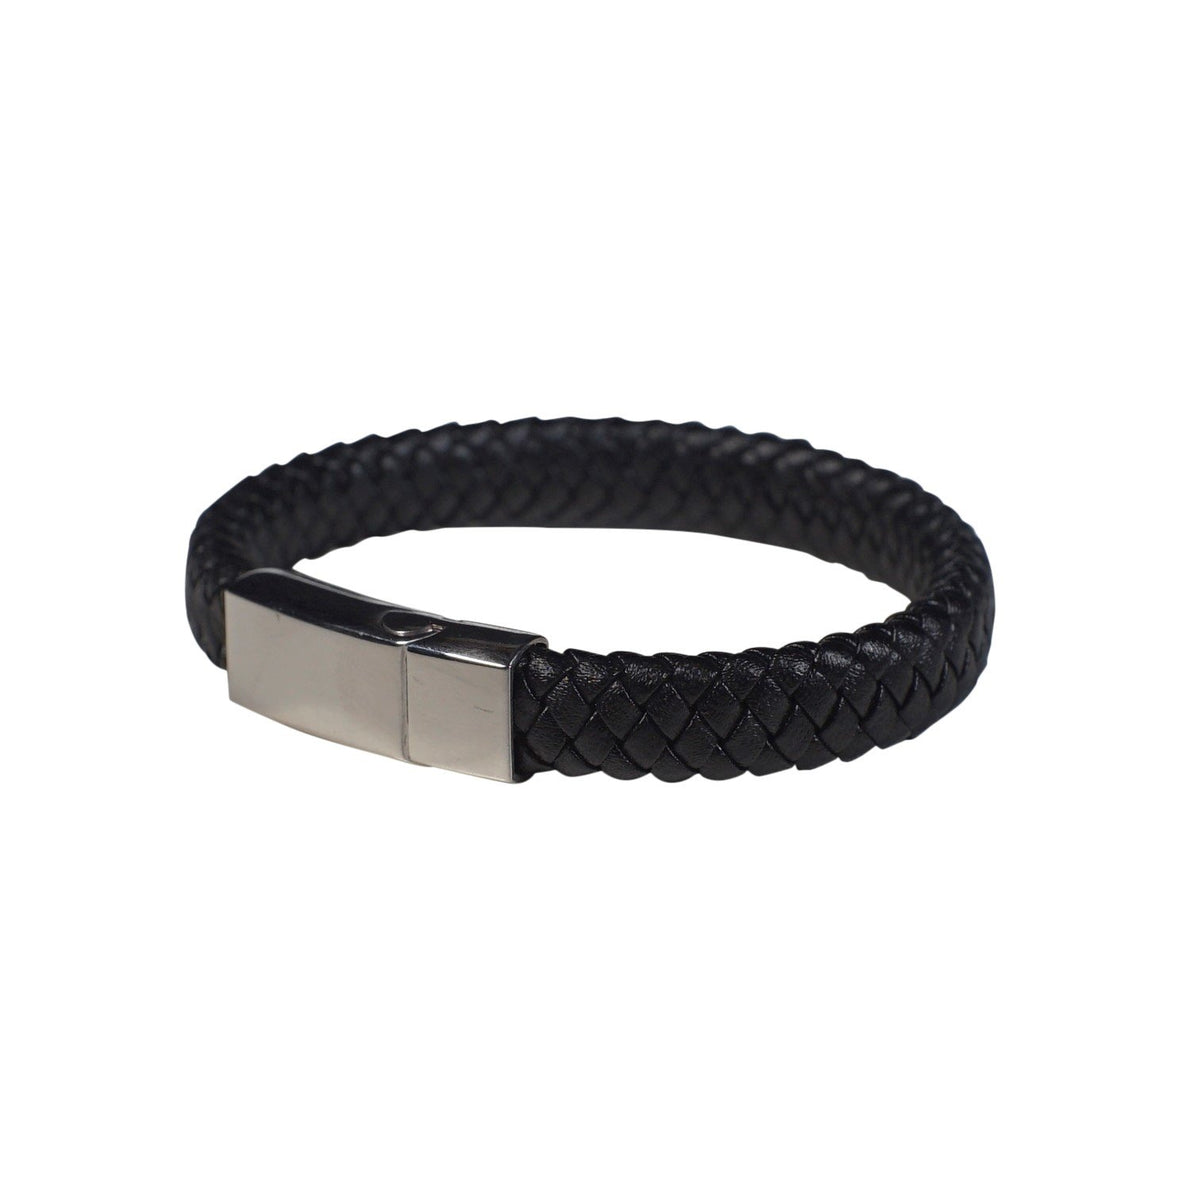 Chester Leather Bracelet in Black - Nomad watch Works